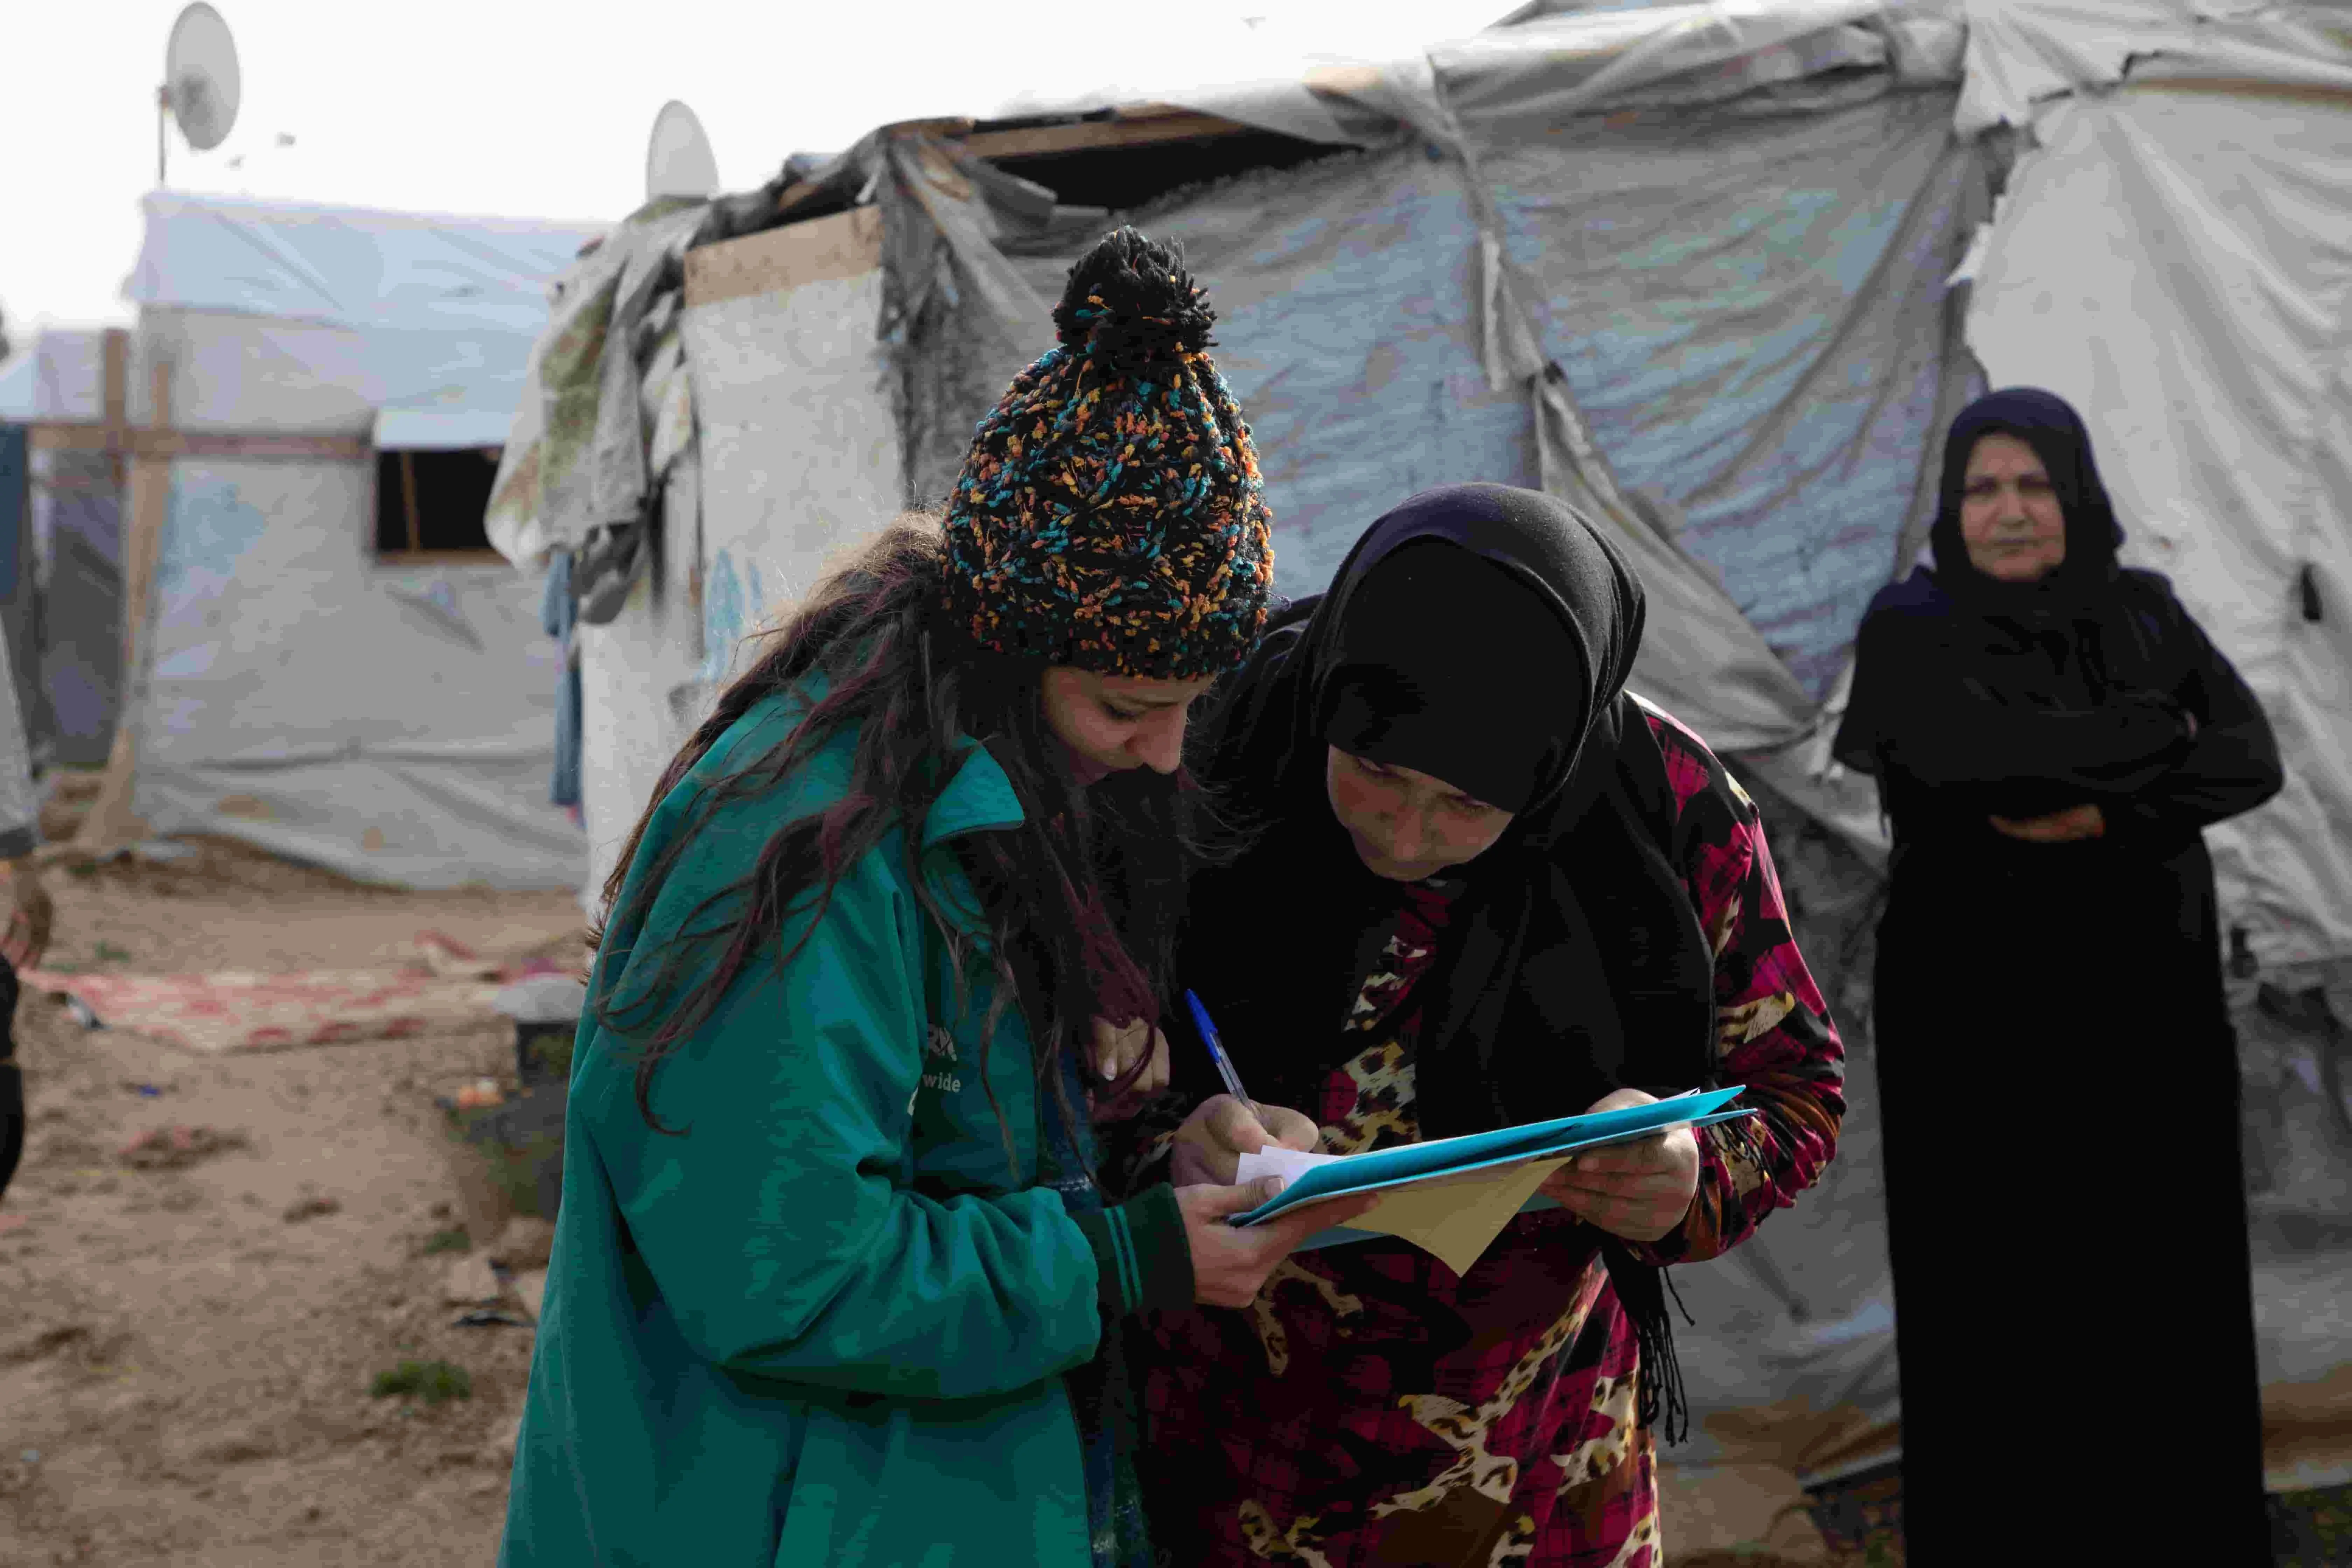 Concern team work with Syrians displaced in Lebanon to winterproof their temporary shelters as the colder months near.